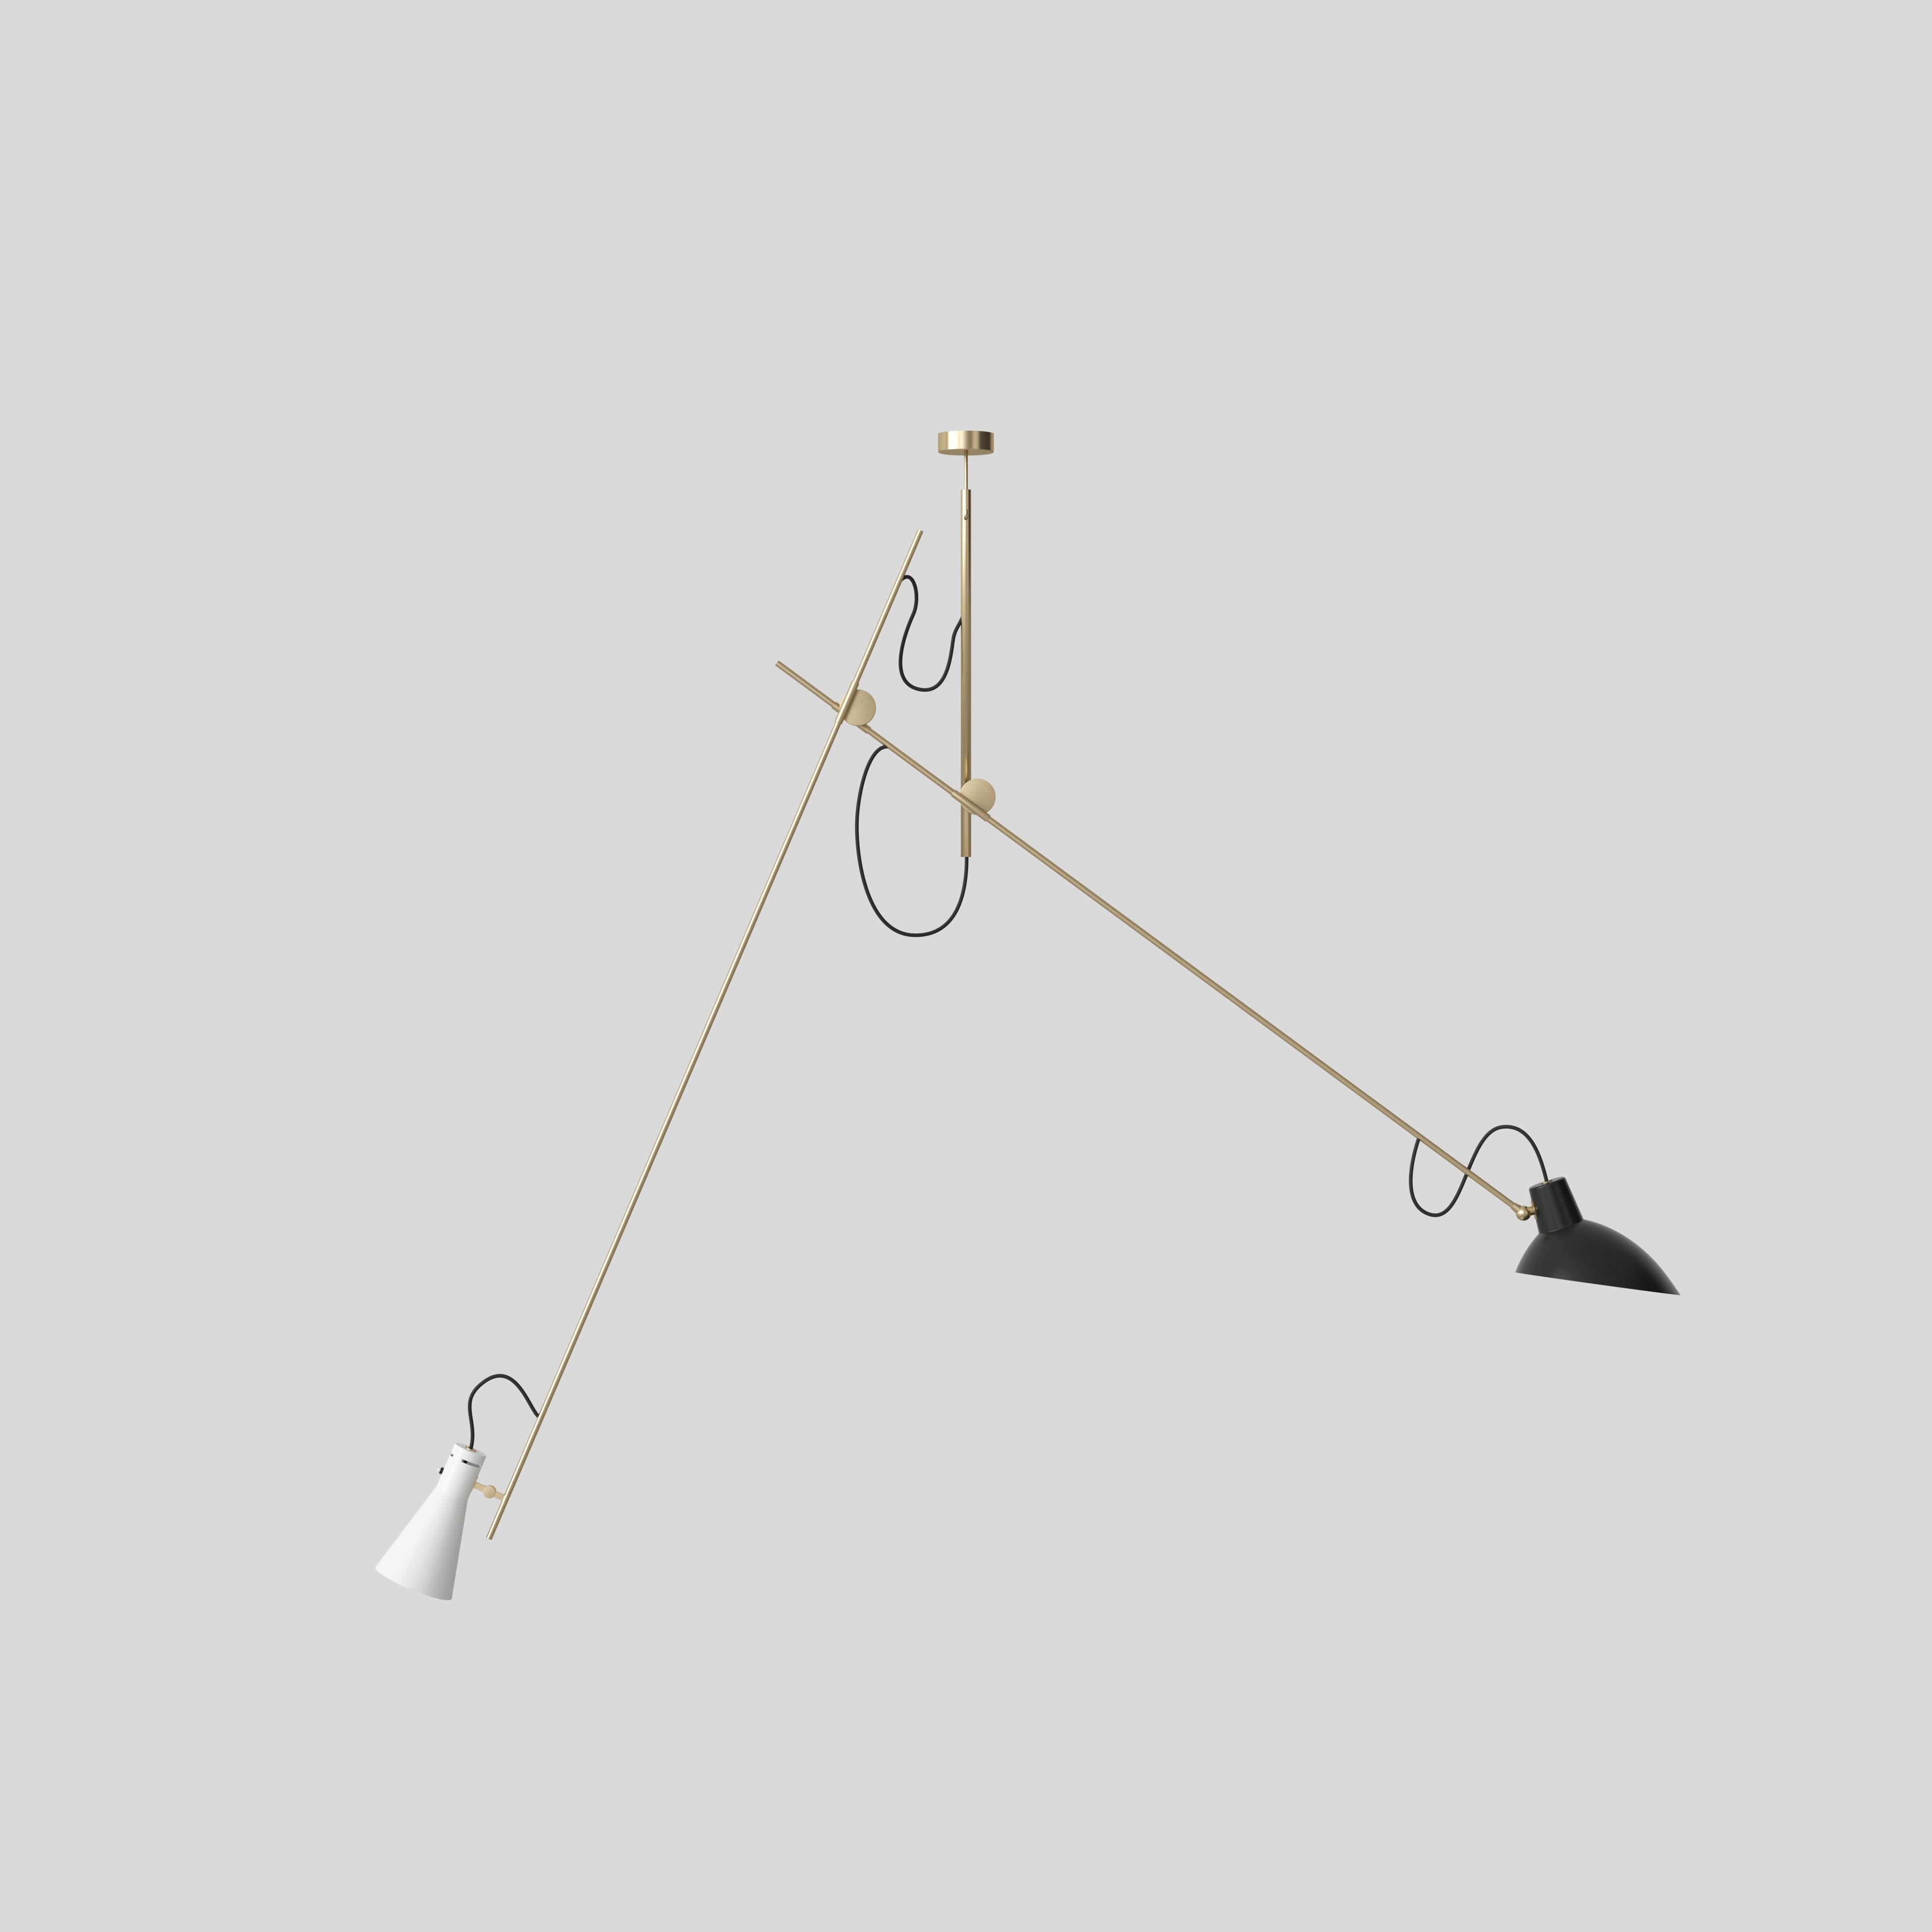 VV Cinquanta Suspension lamp
Design by Vittoriano Viganò
This version is with black and white lacquered reflector and brass frame.

The VV Cinquanta Suspension is elegant and versatile with two posable direct light sources.

With a distinctive